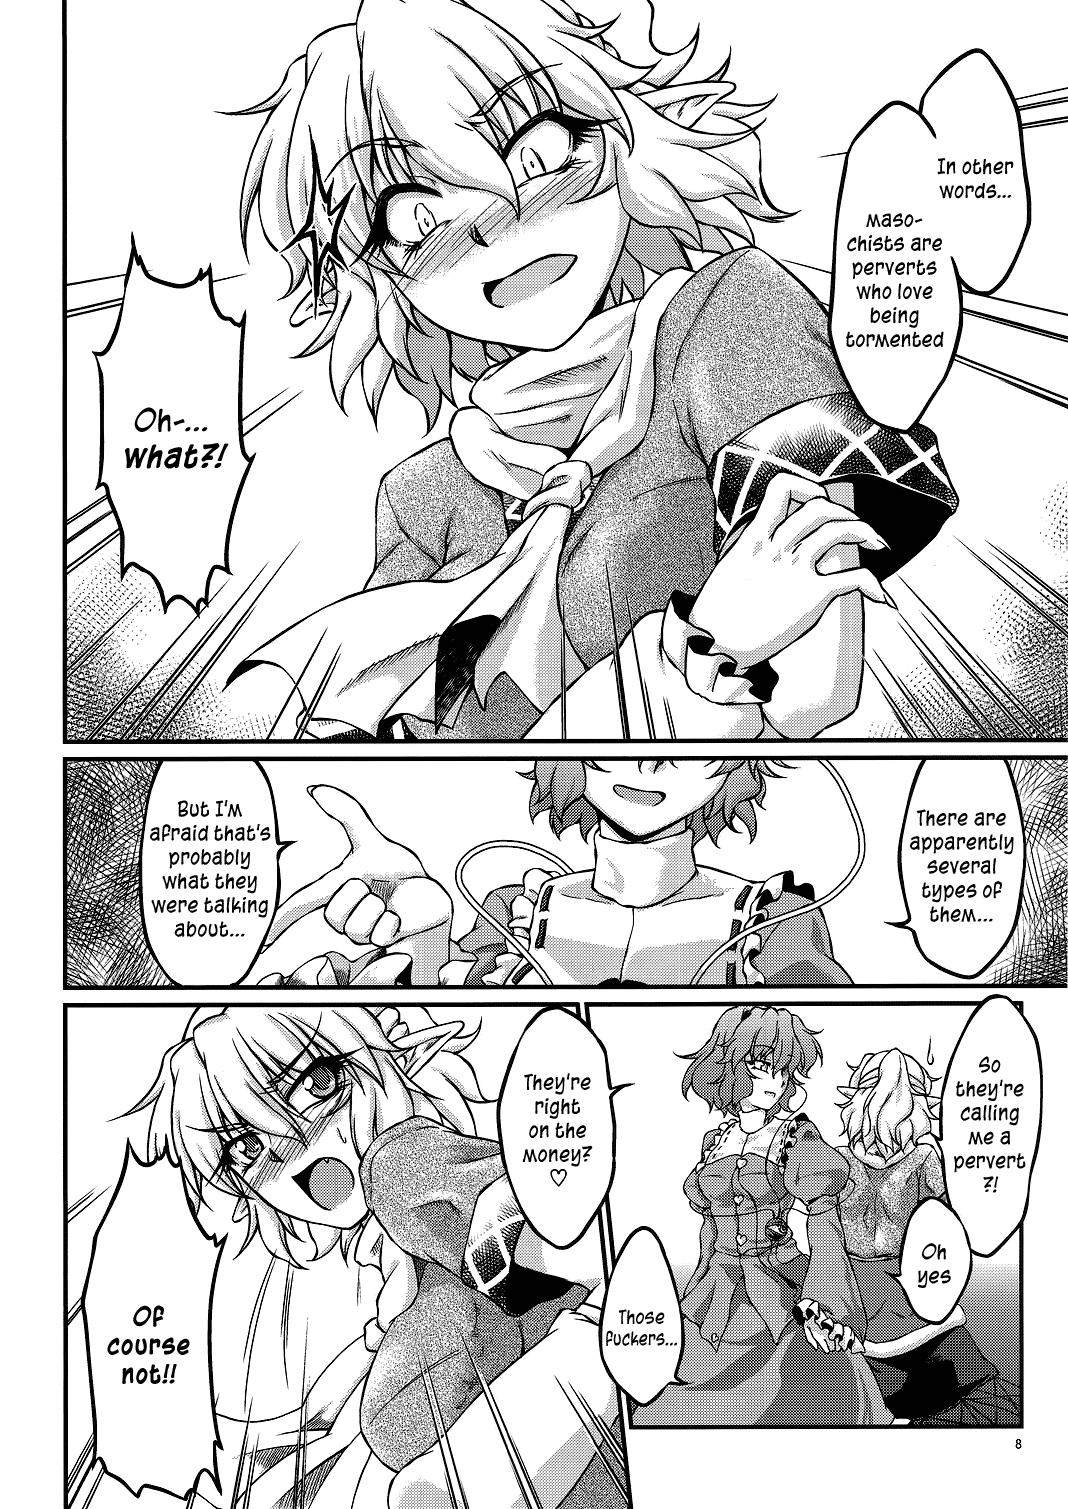 Playing Say the Word - Touhou project Eating Pussy - Page 7